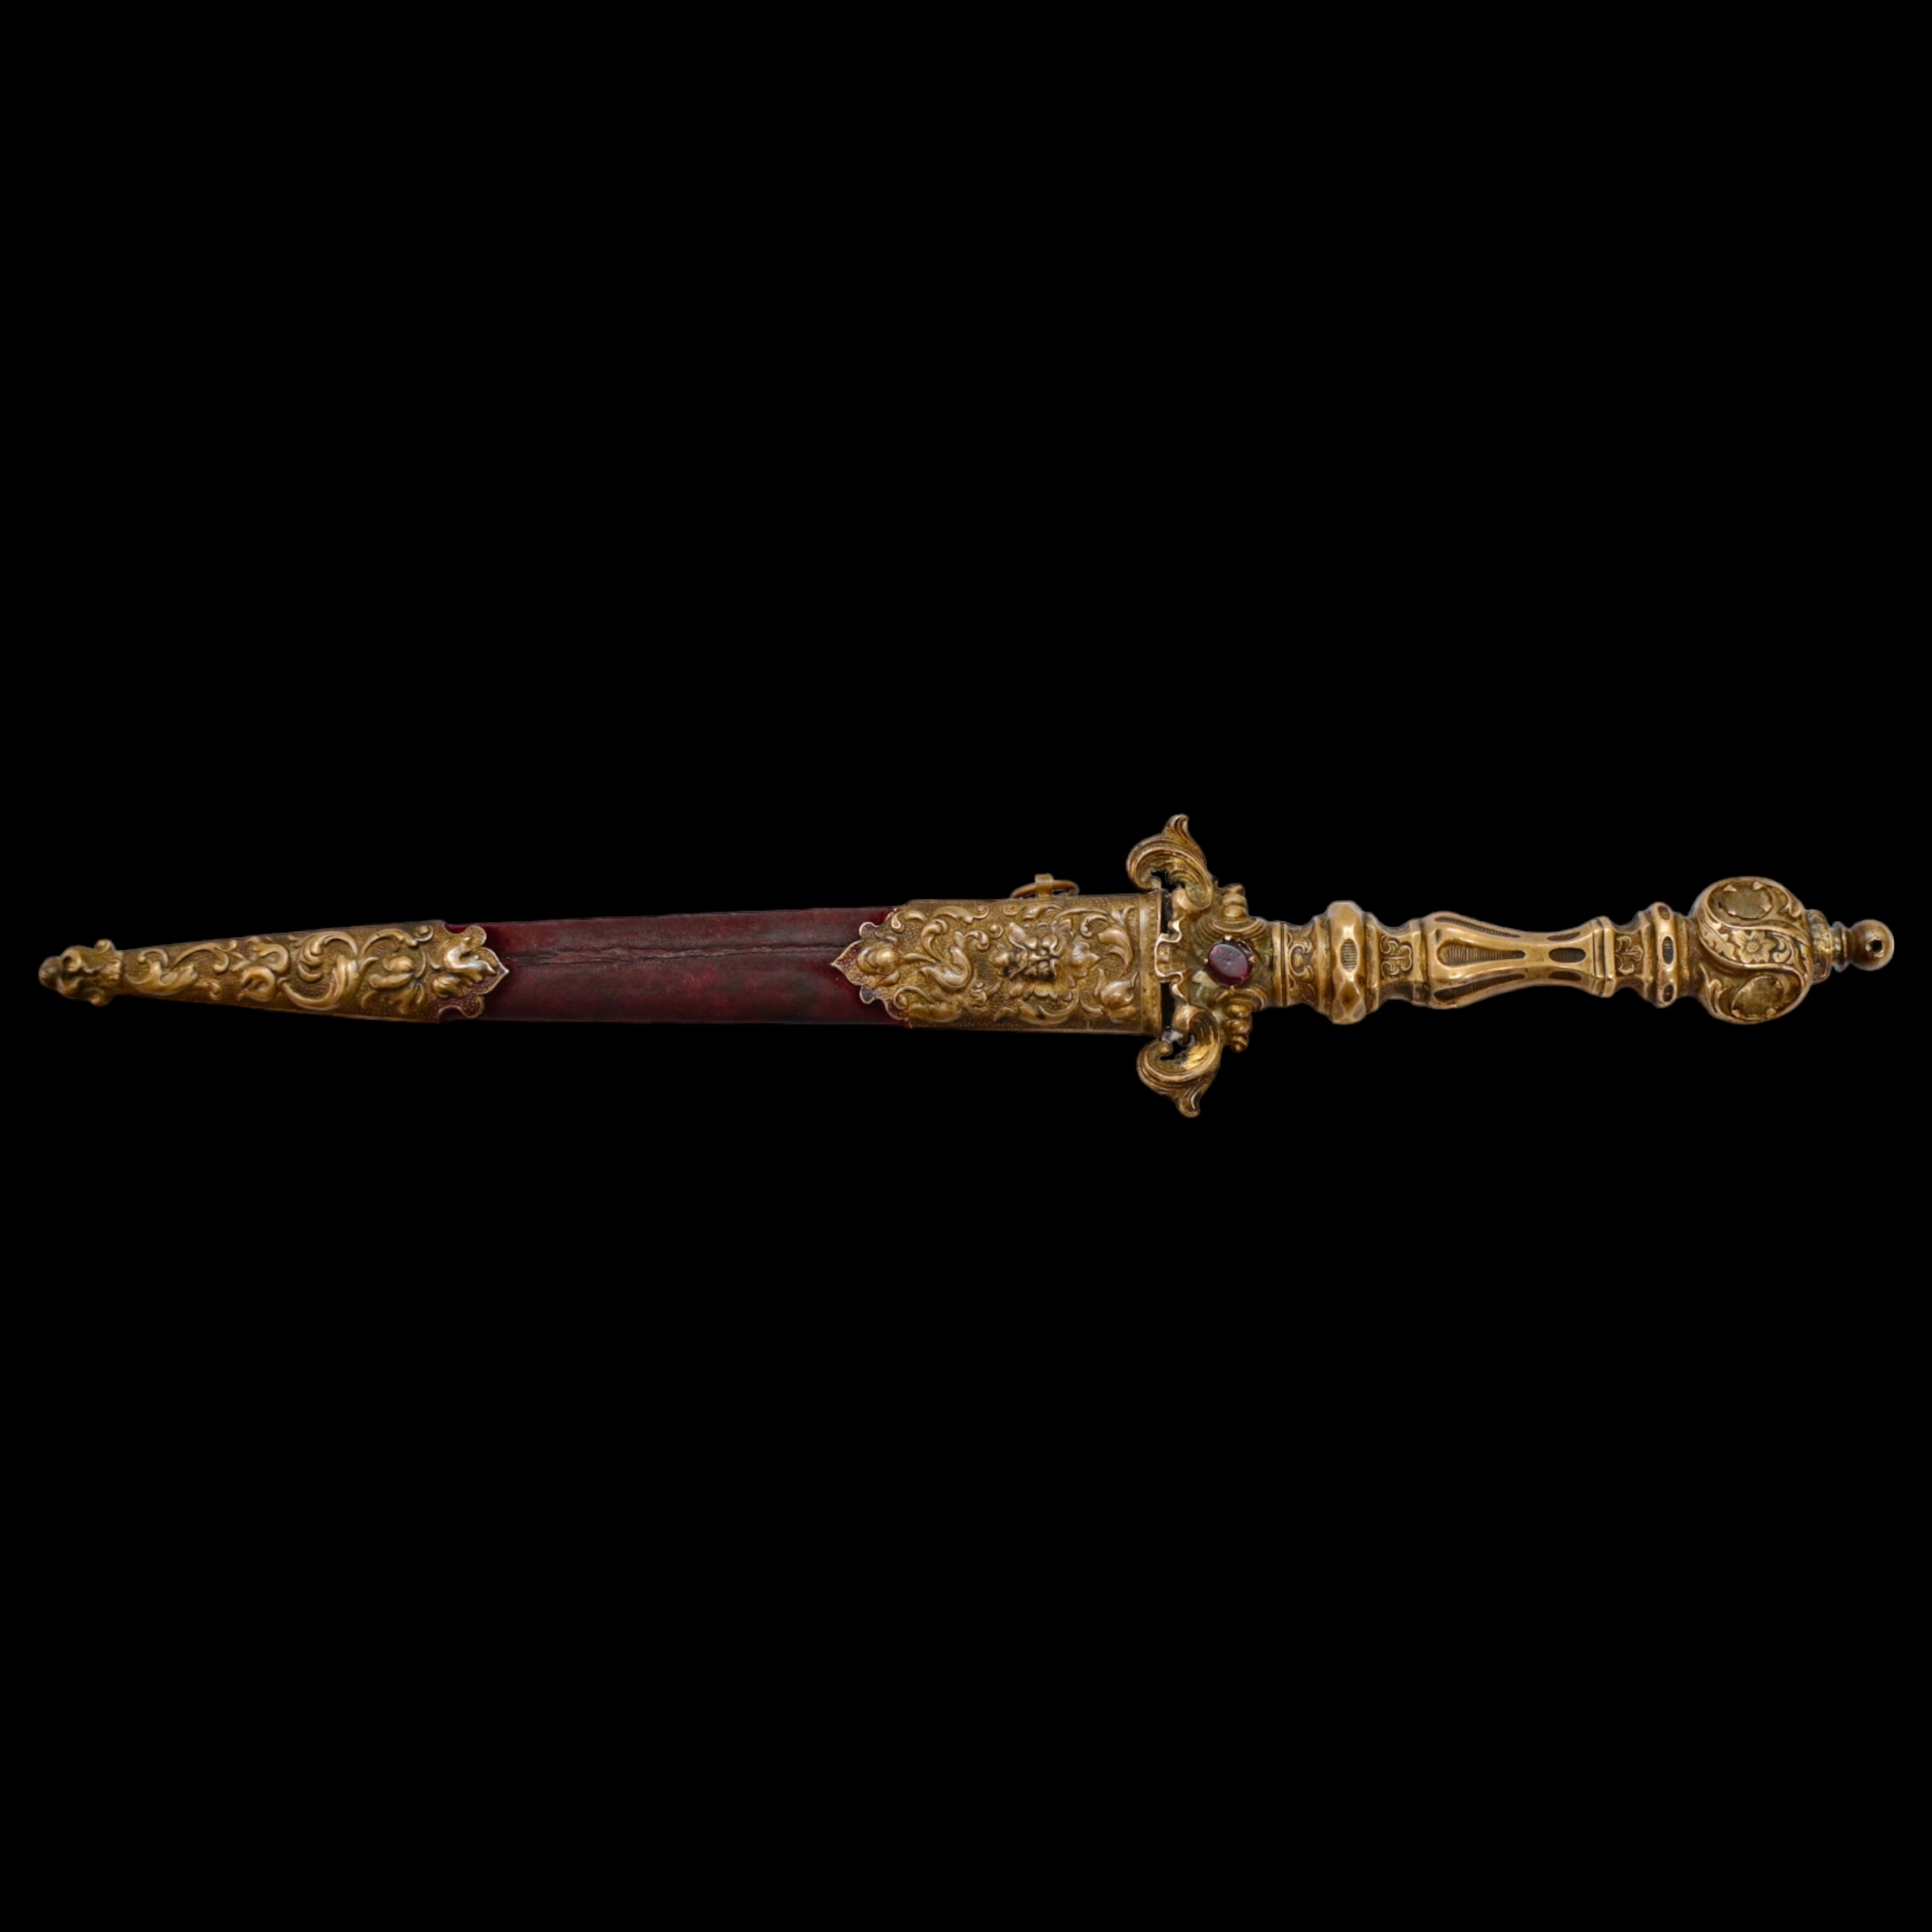 A Very high quality Dagger Renaissance Style Brass with inlaid colored stones, 19th century. - Image 6 of 9